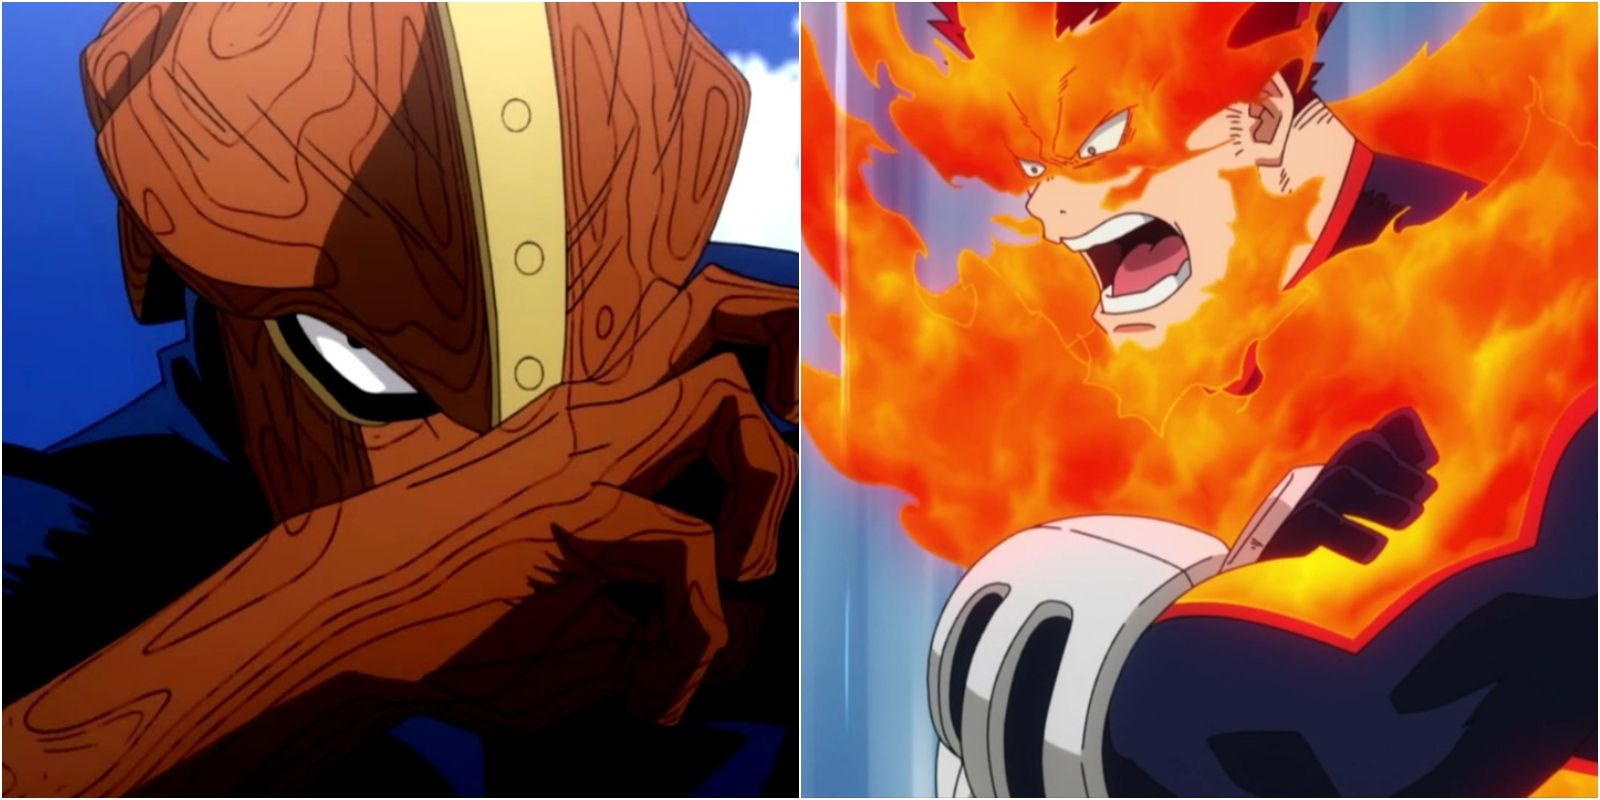 No rest for these two! | My Hero Academia | Know Your Meme